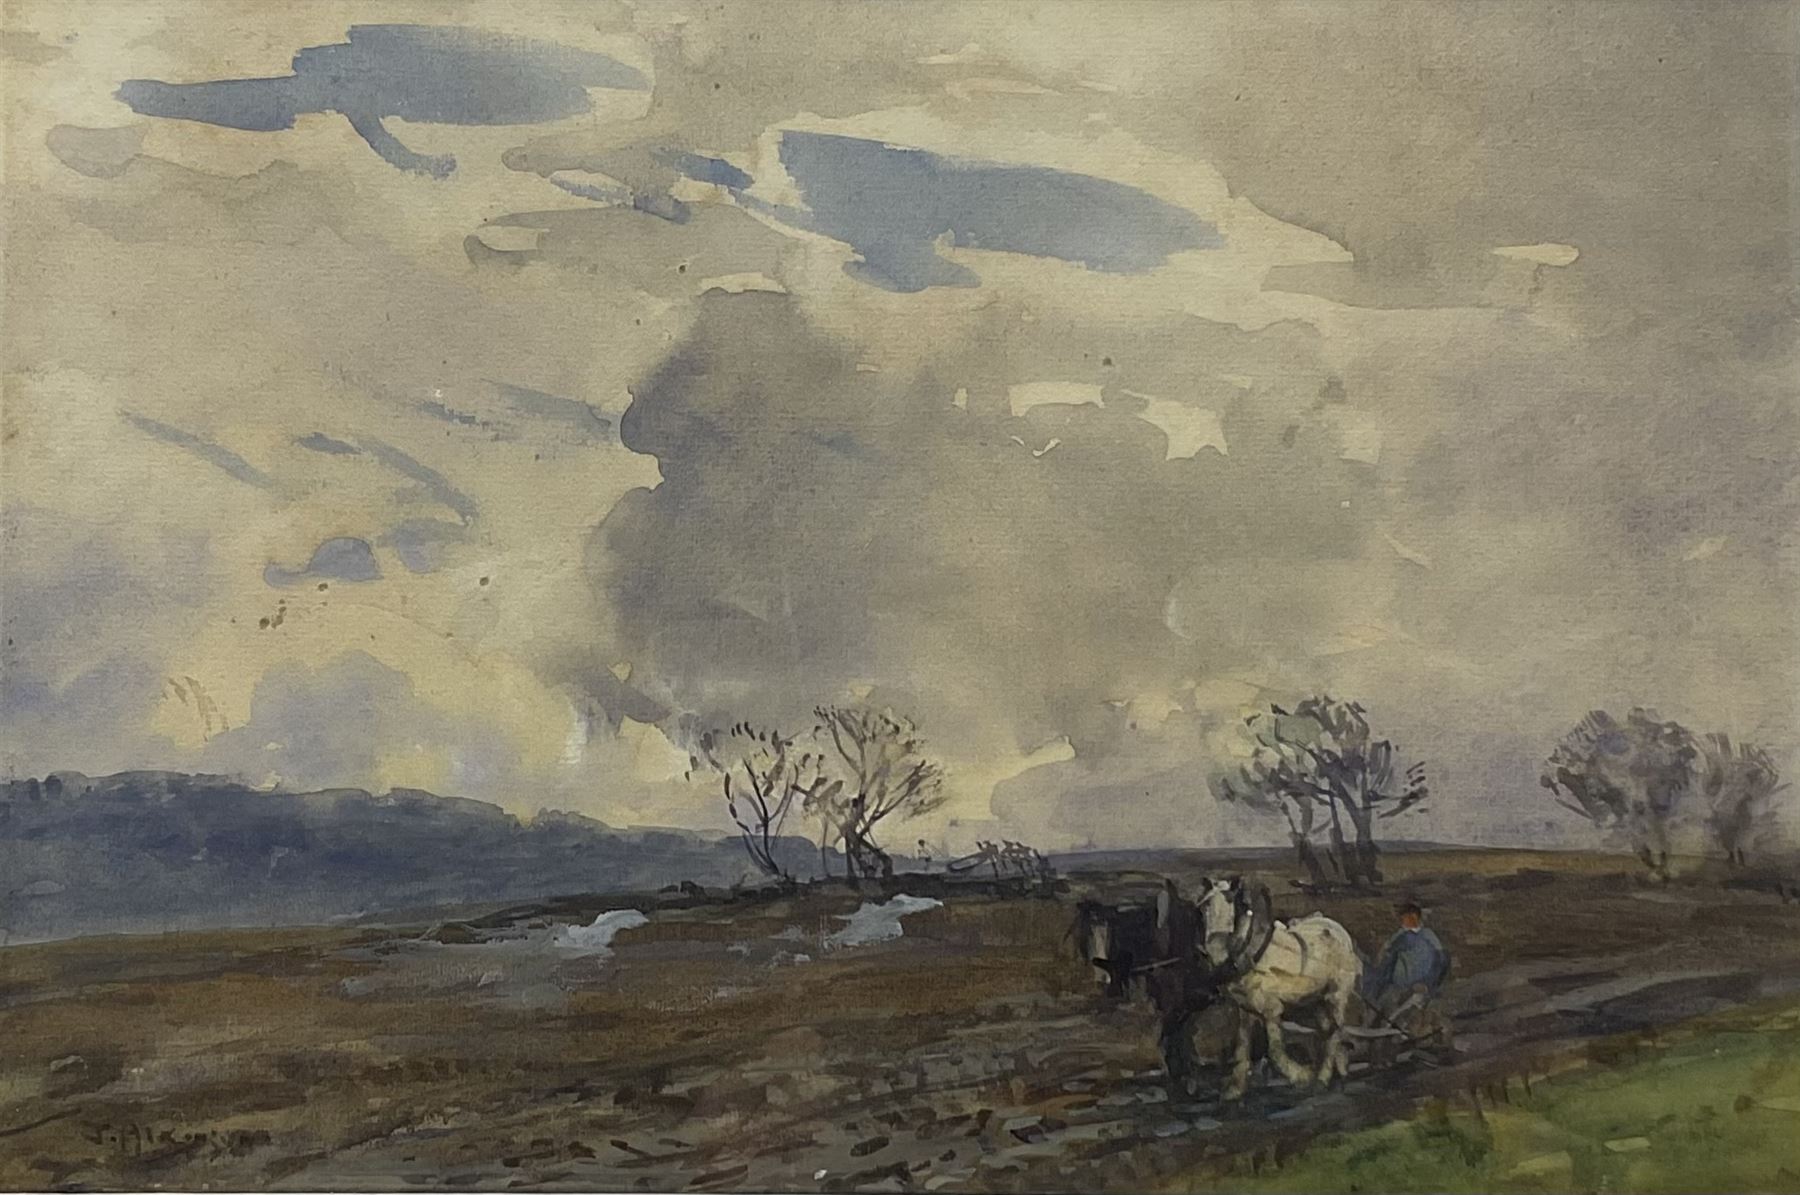 John Atkinson (Staithes Group 1863-1924): Horses Ploughing under Heavy Skies